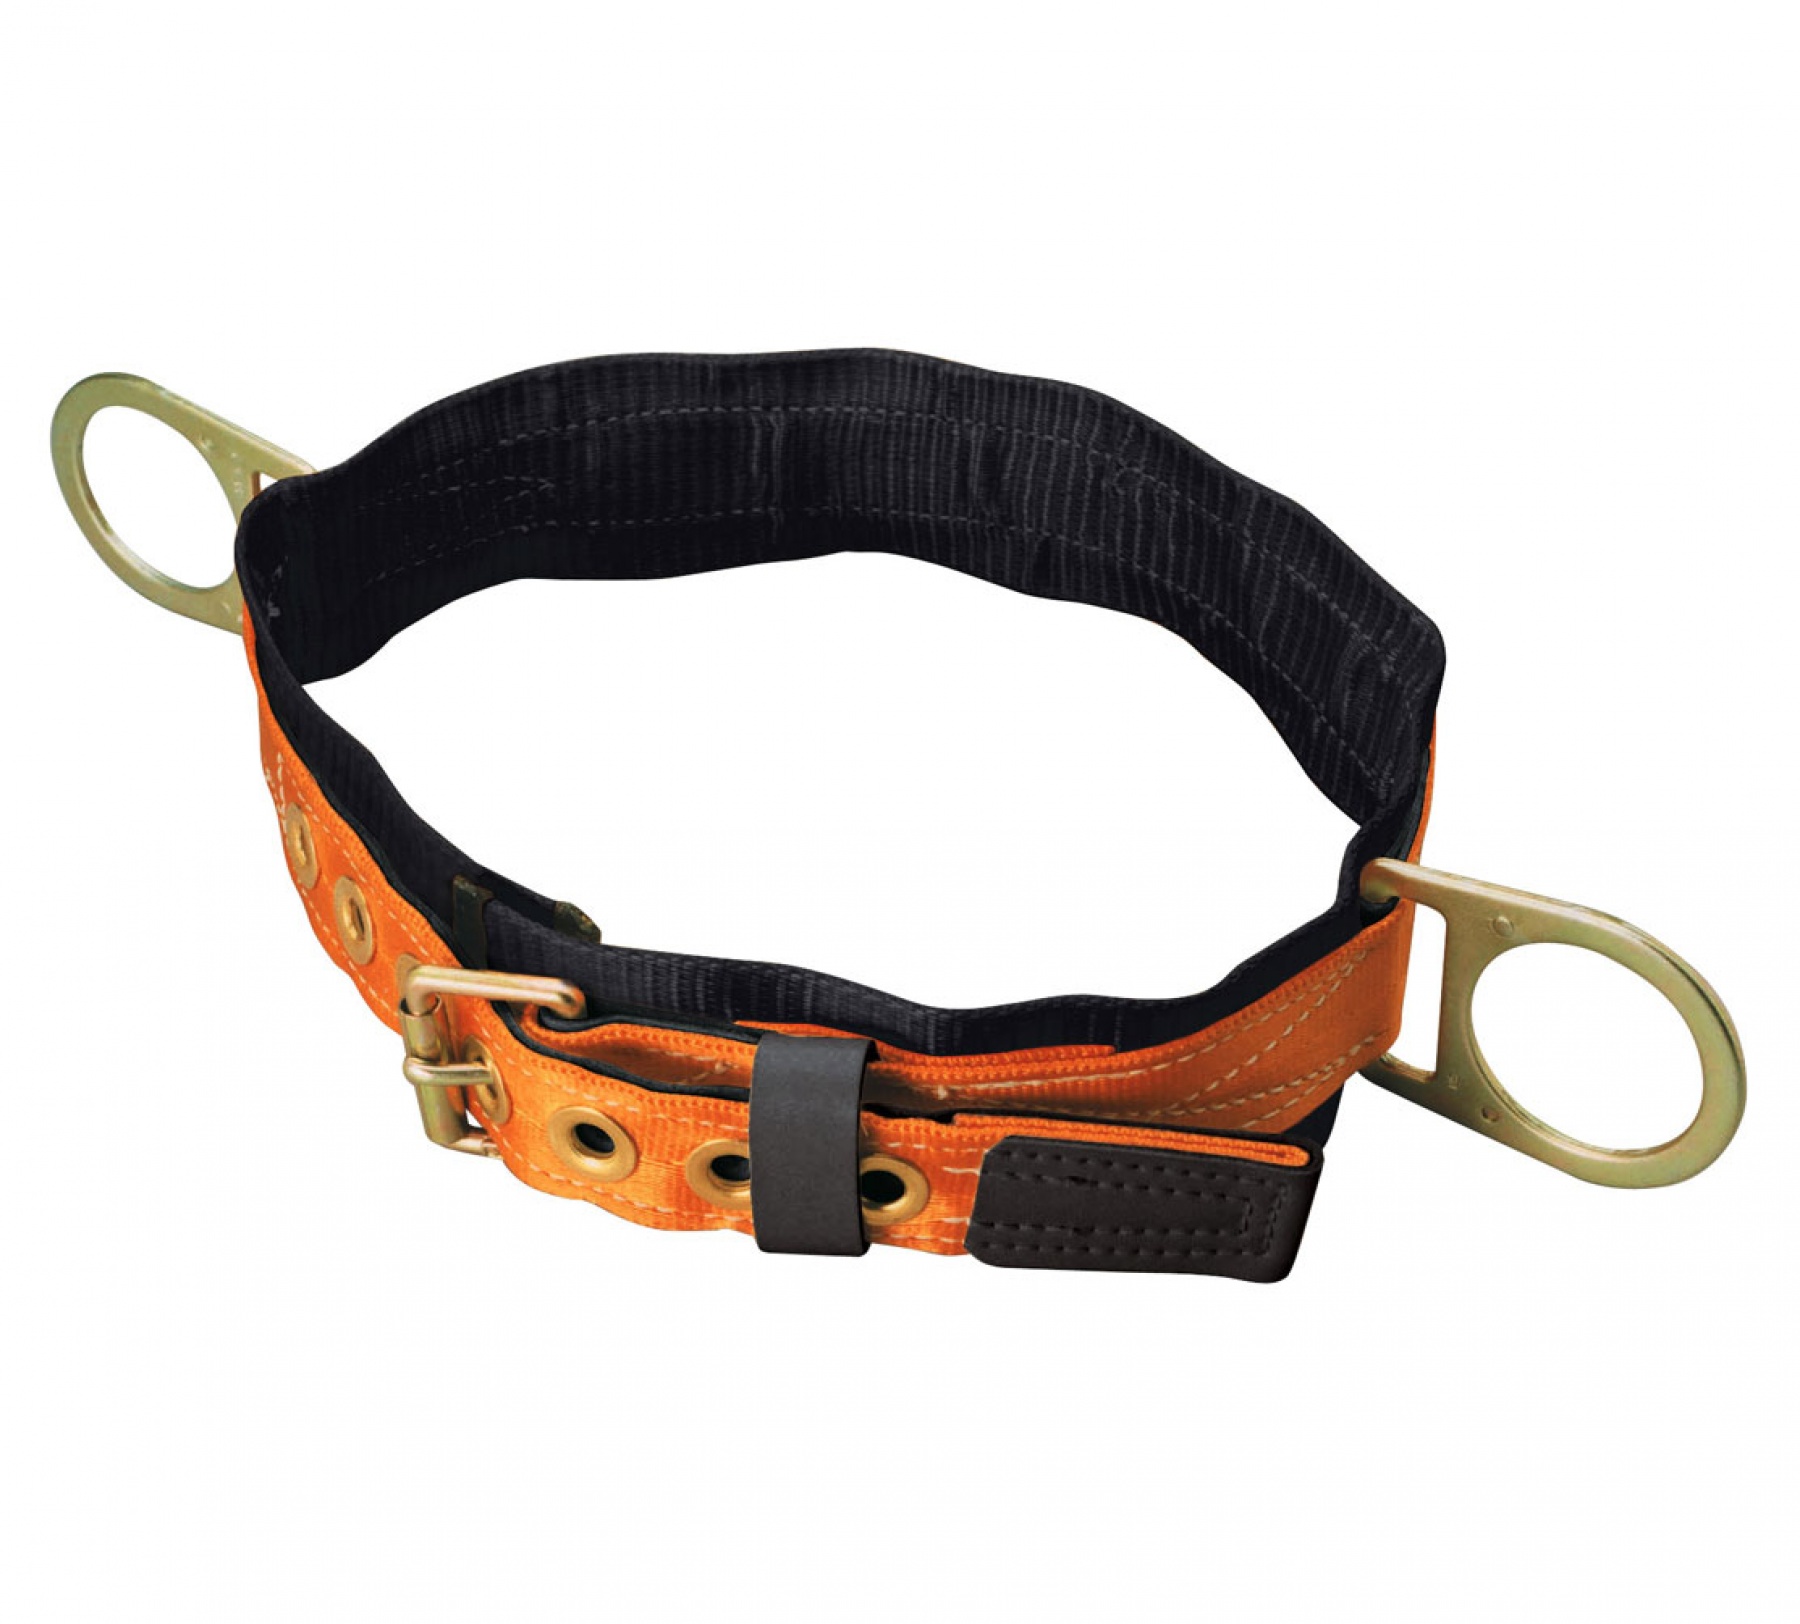 Buy Safety Belt With Side D-Rings | Harnesses & Body Belts from Safety ...